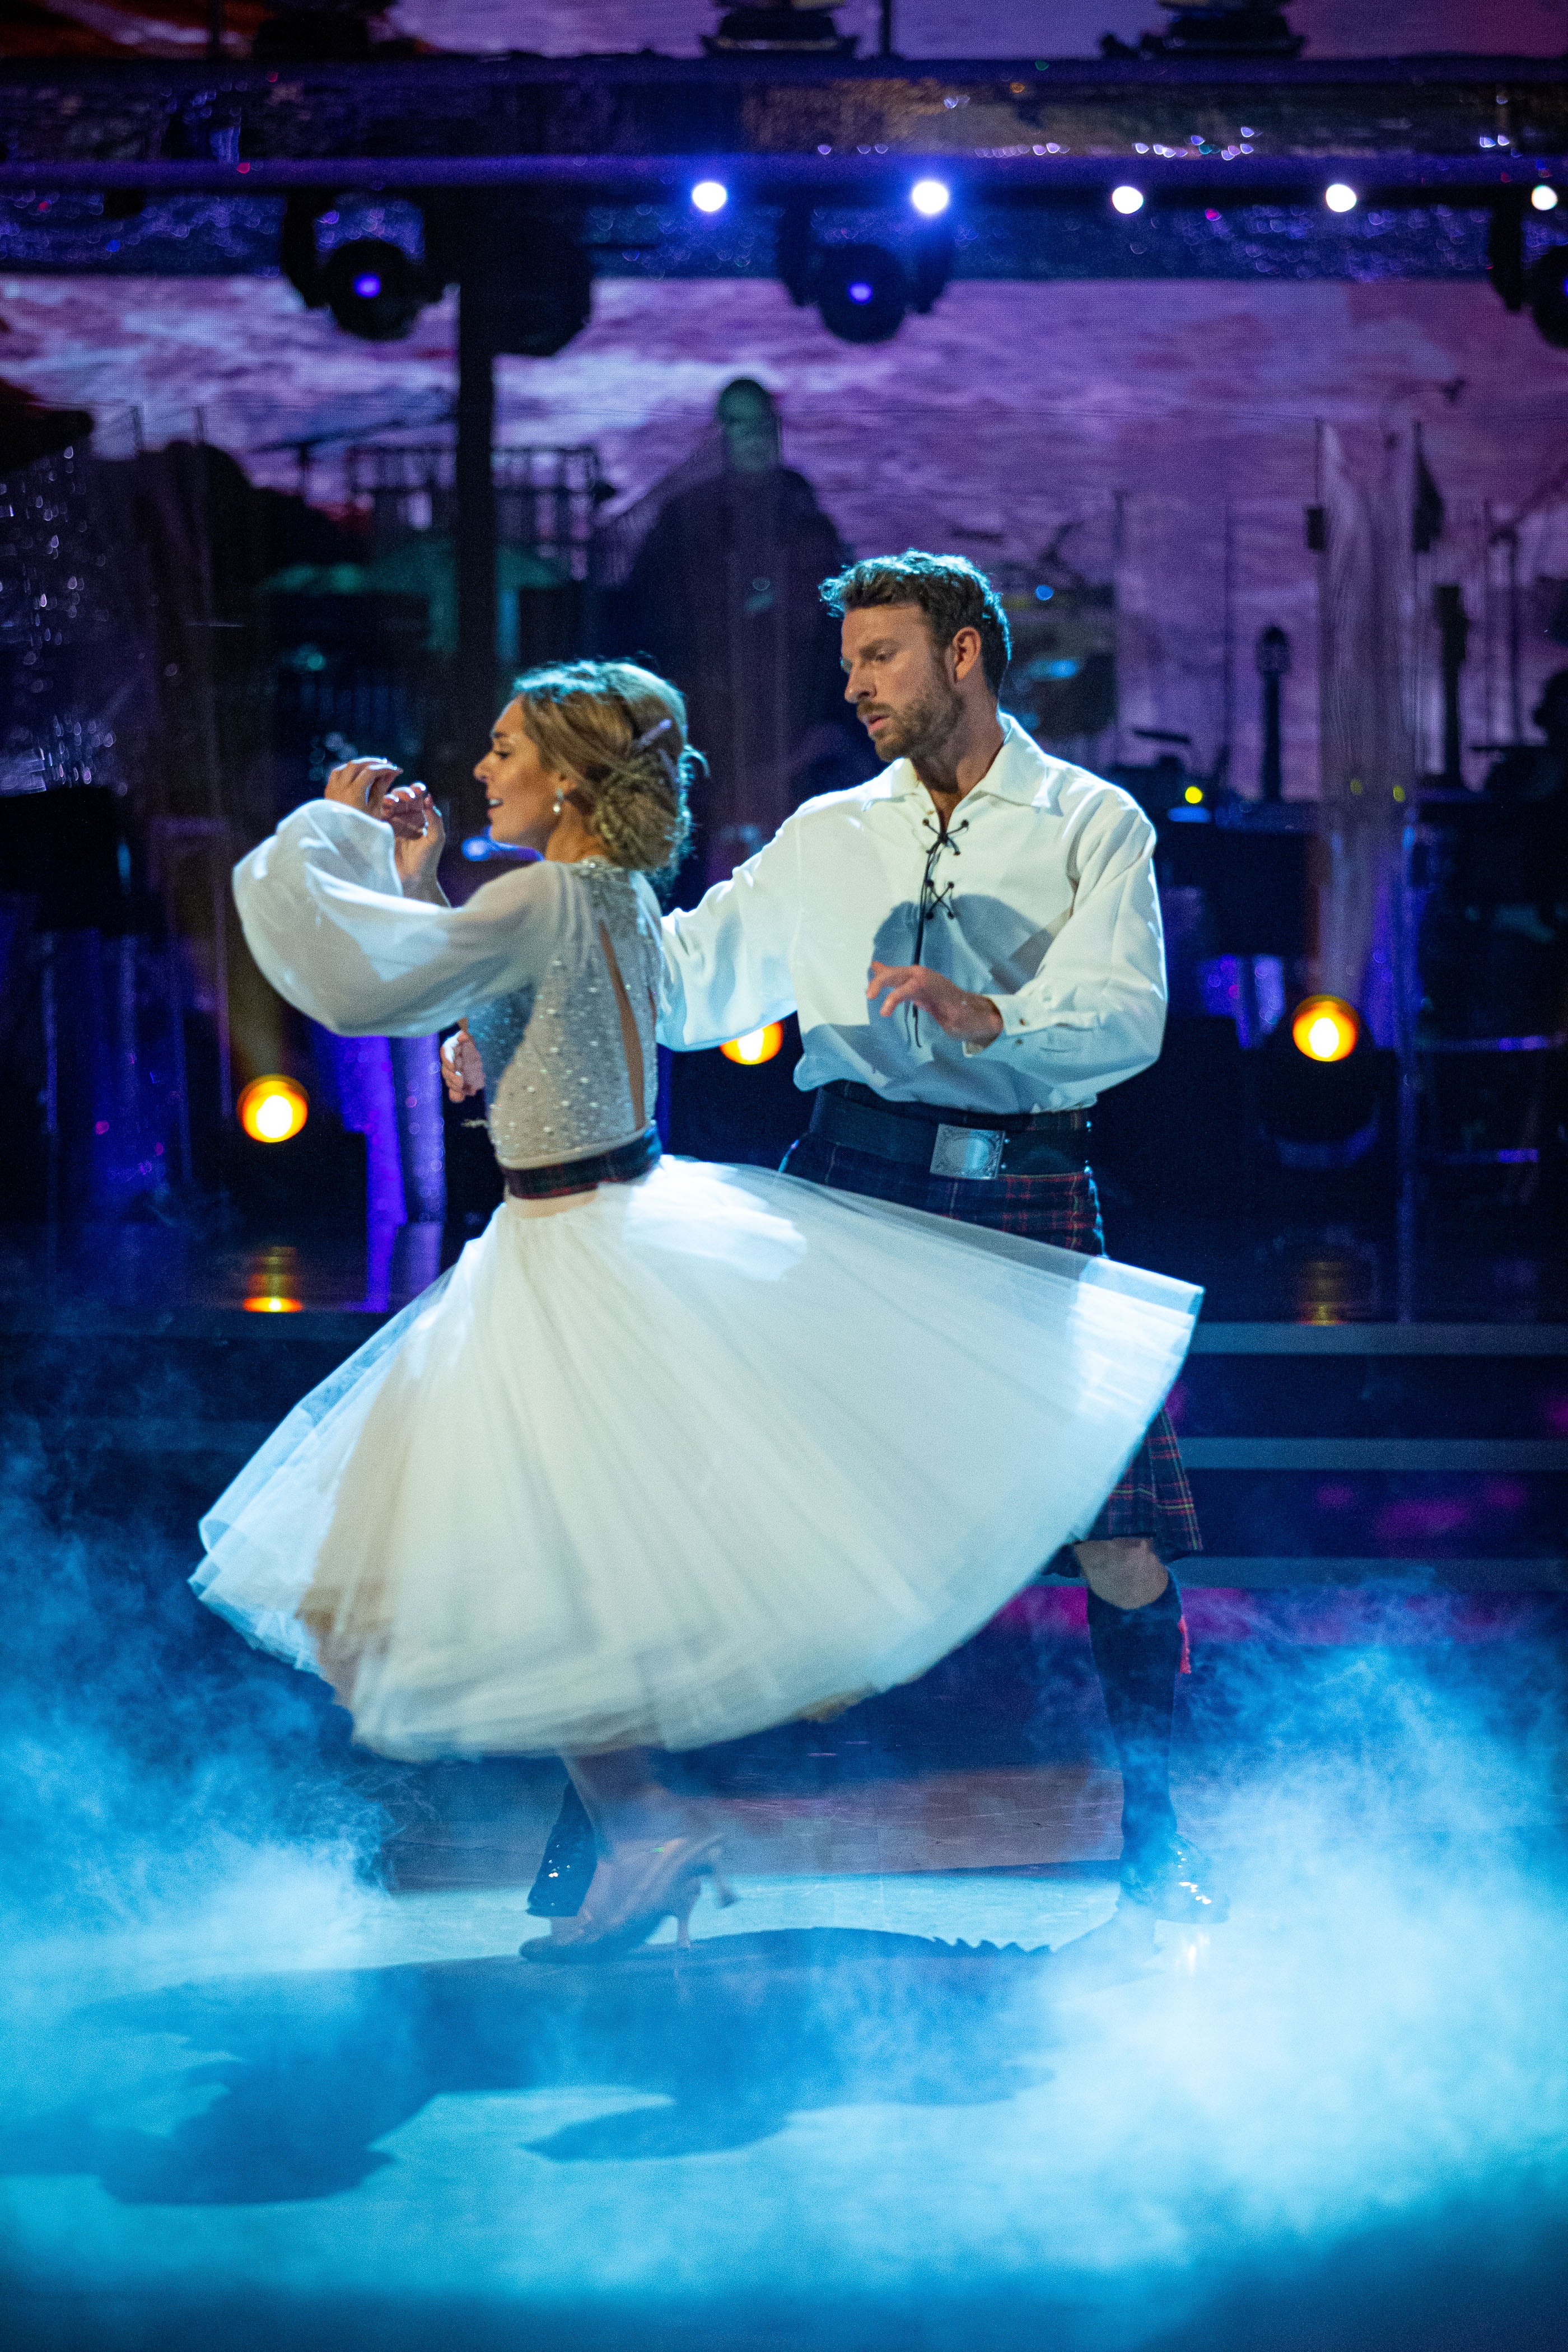 The Queen commented on JJ Chalmers dancing ‘fantastically’ on Strictly Come Dancing (Guy Levy/BBC/PA)